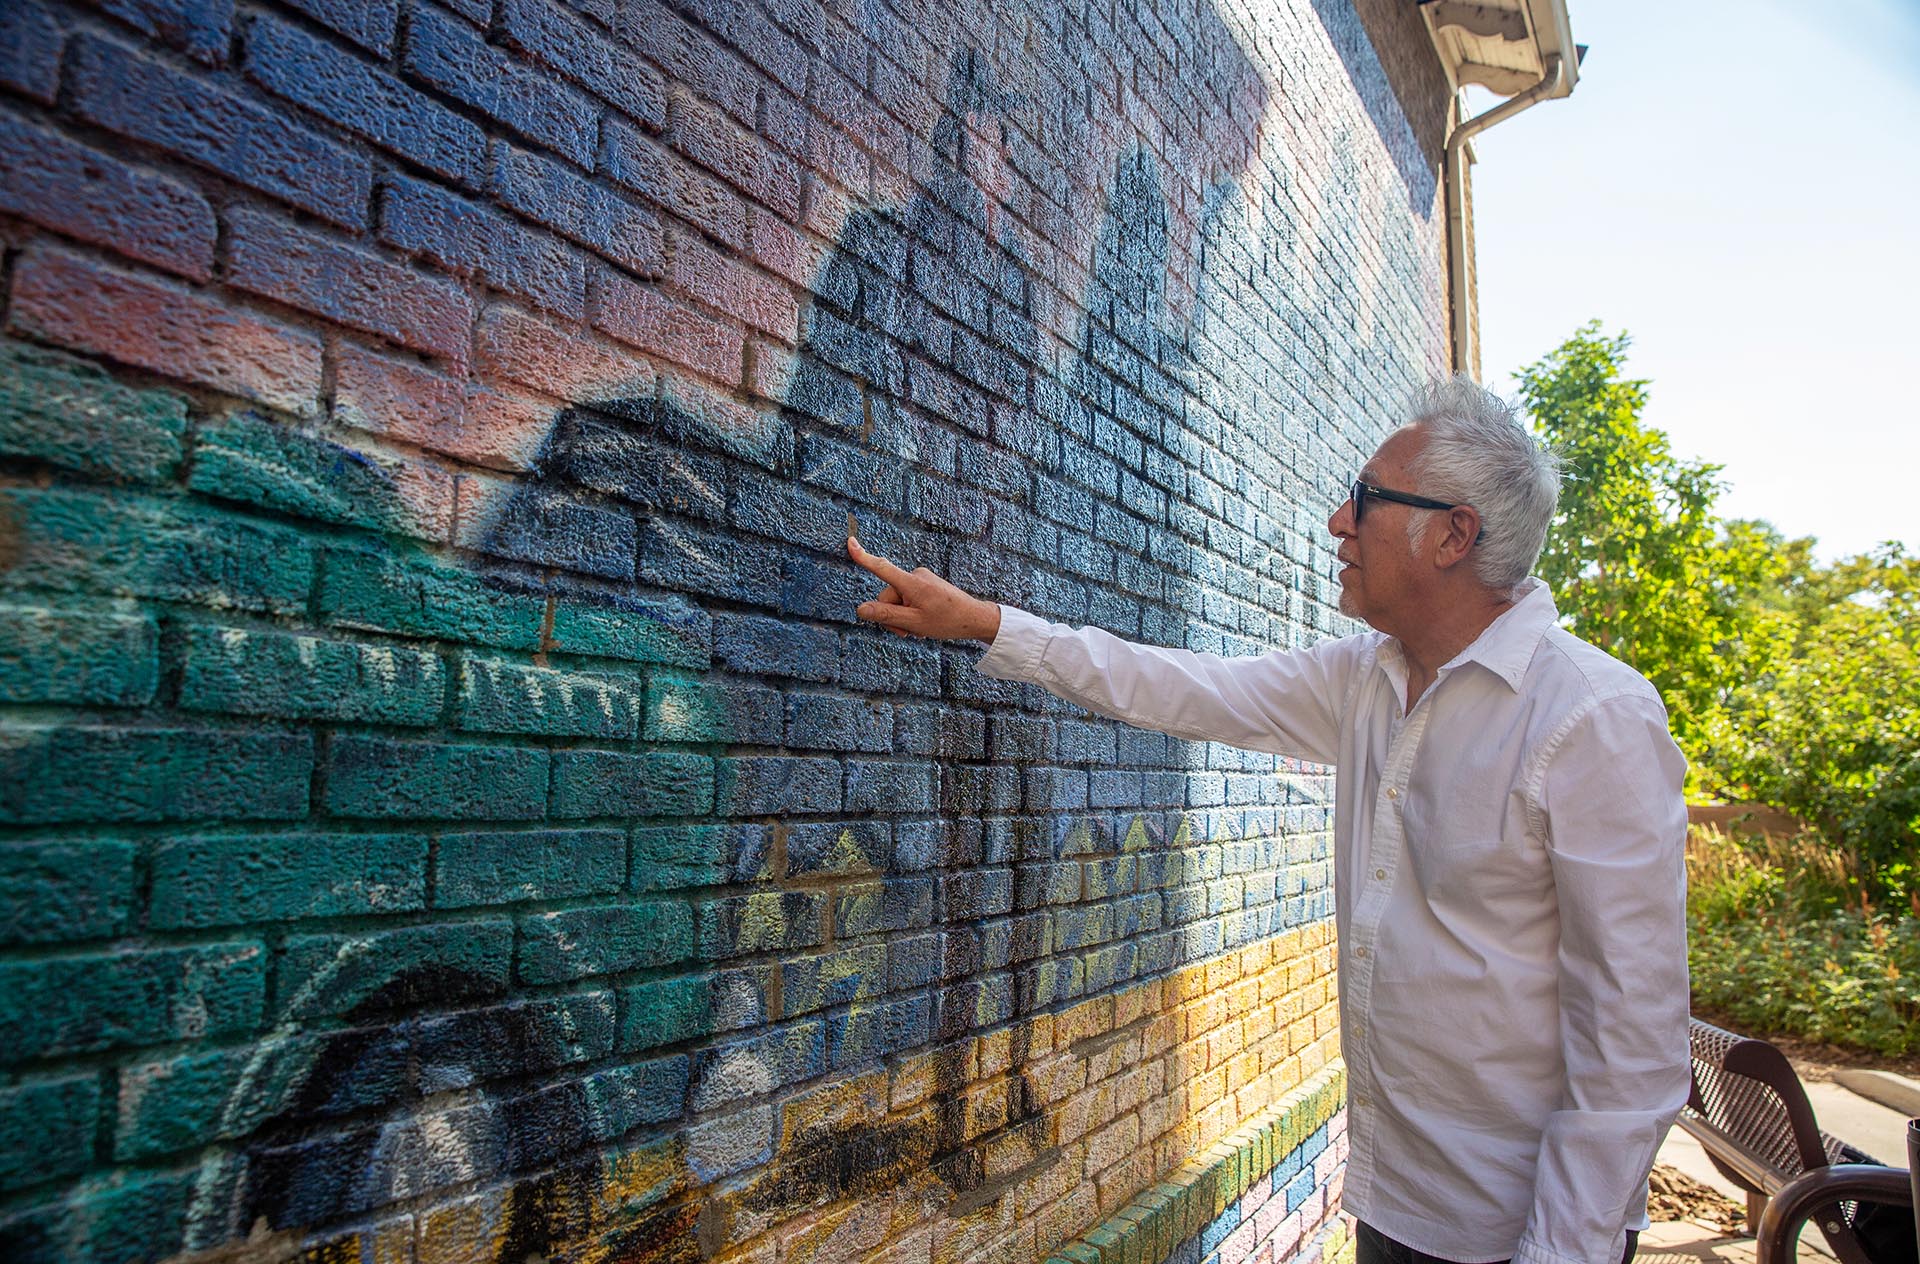 Carlos Frequez takes a first look at the mural after it was freshly painted.